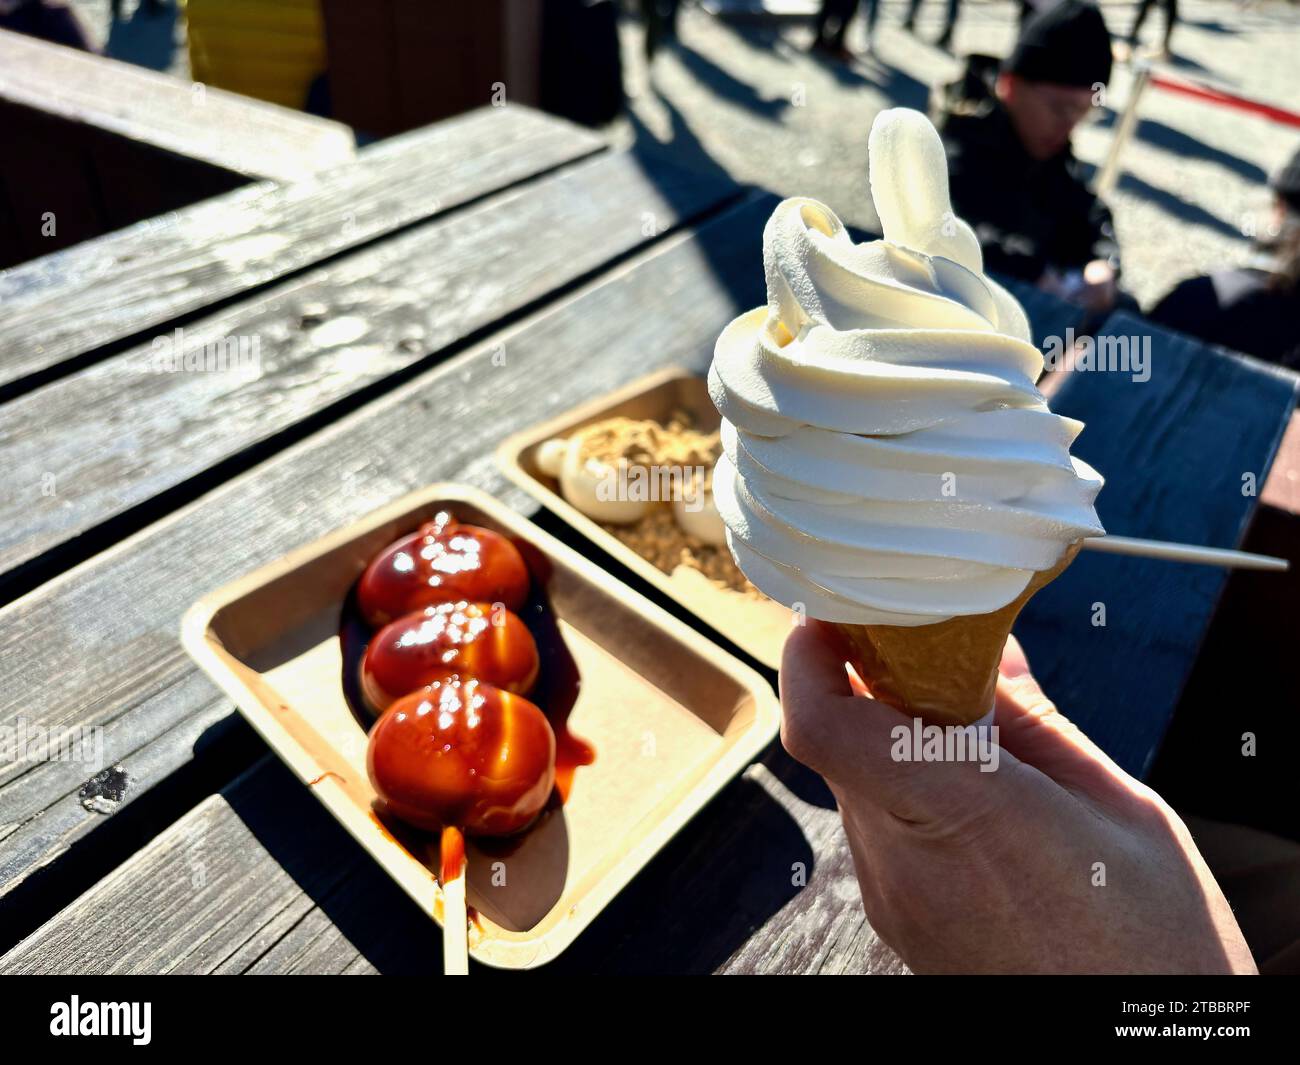 A hand holding an ice cream cone with two plates of Japanese rice dumplings or dango in the background. Stock Photo